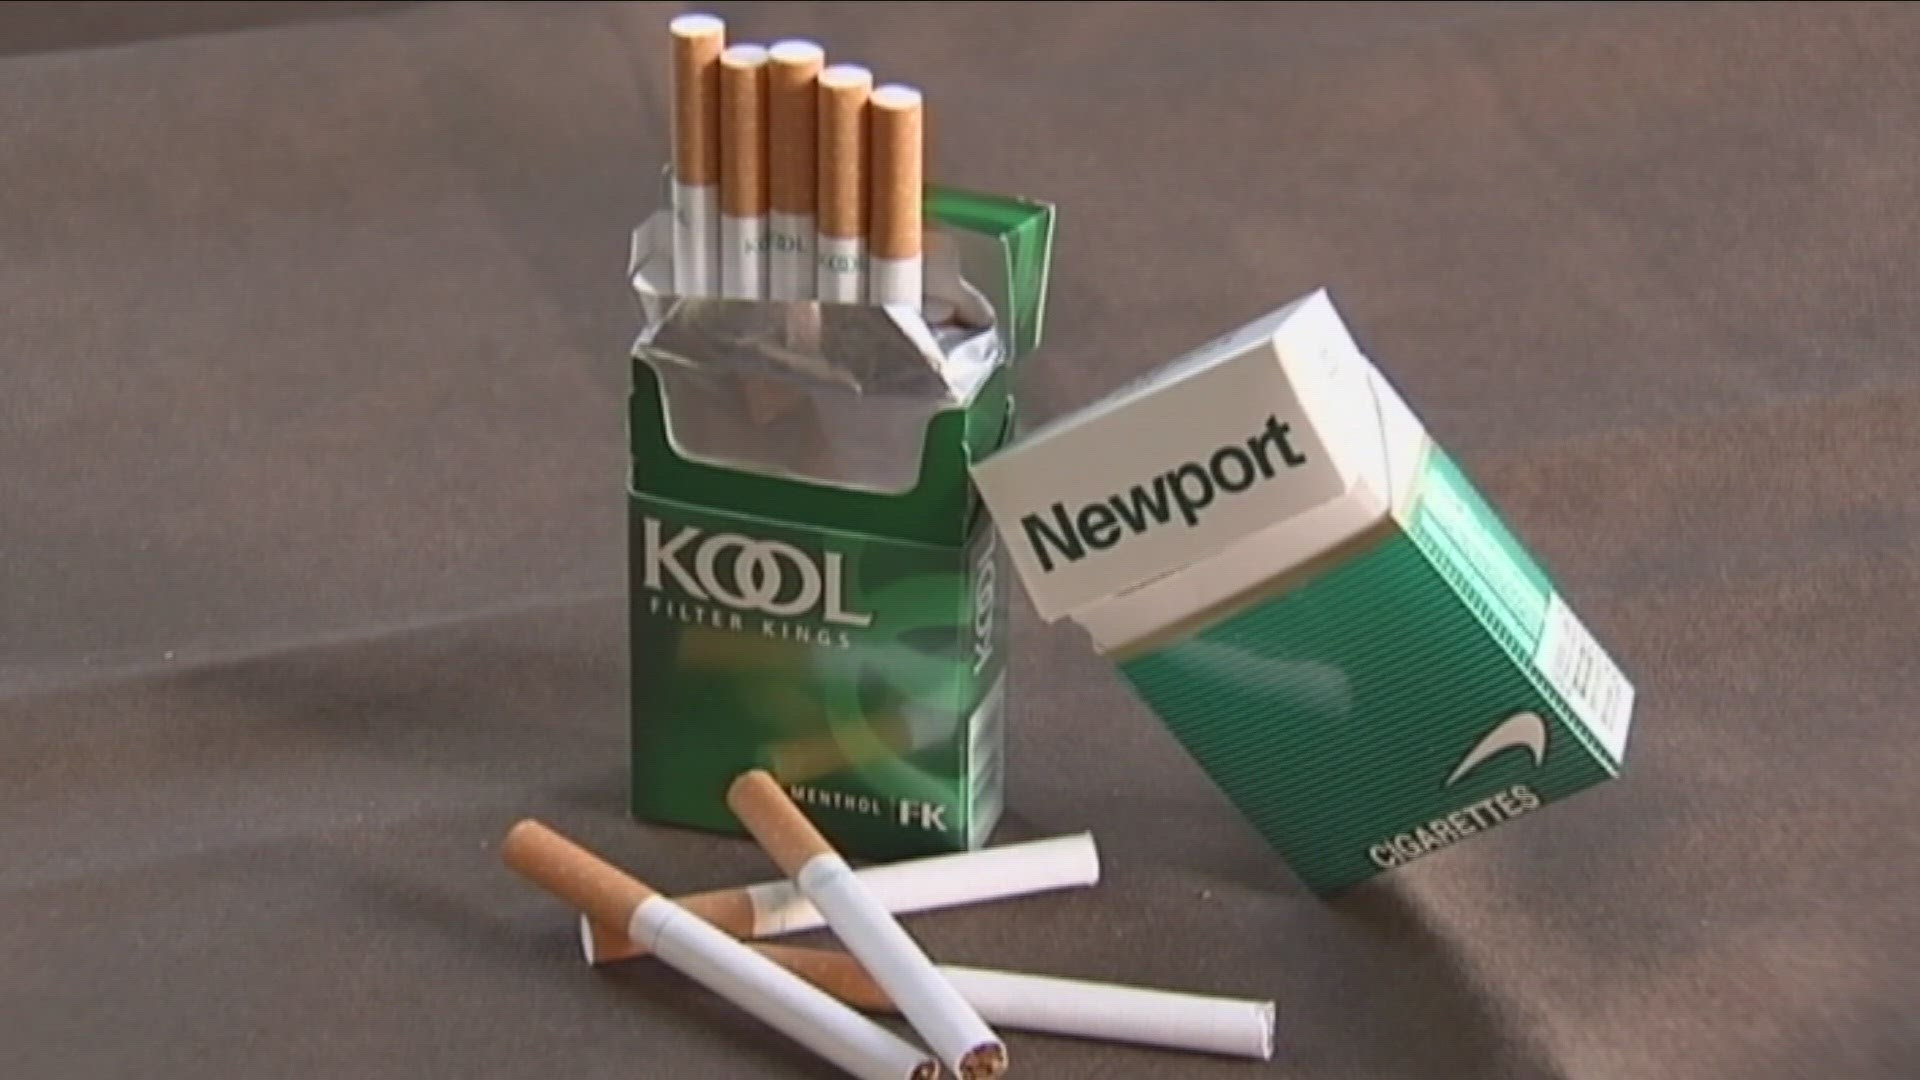 A proposal has been submitted to the Buffalo Common Council to ban the sale of menthol tobacco.